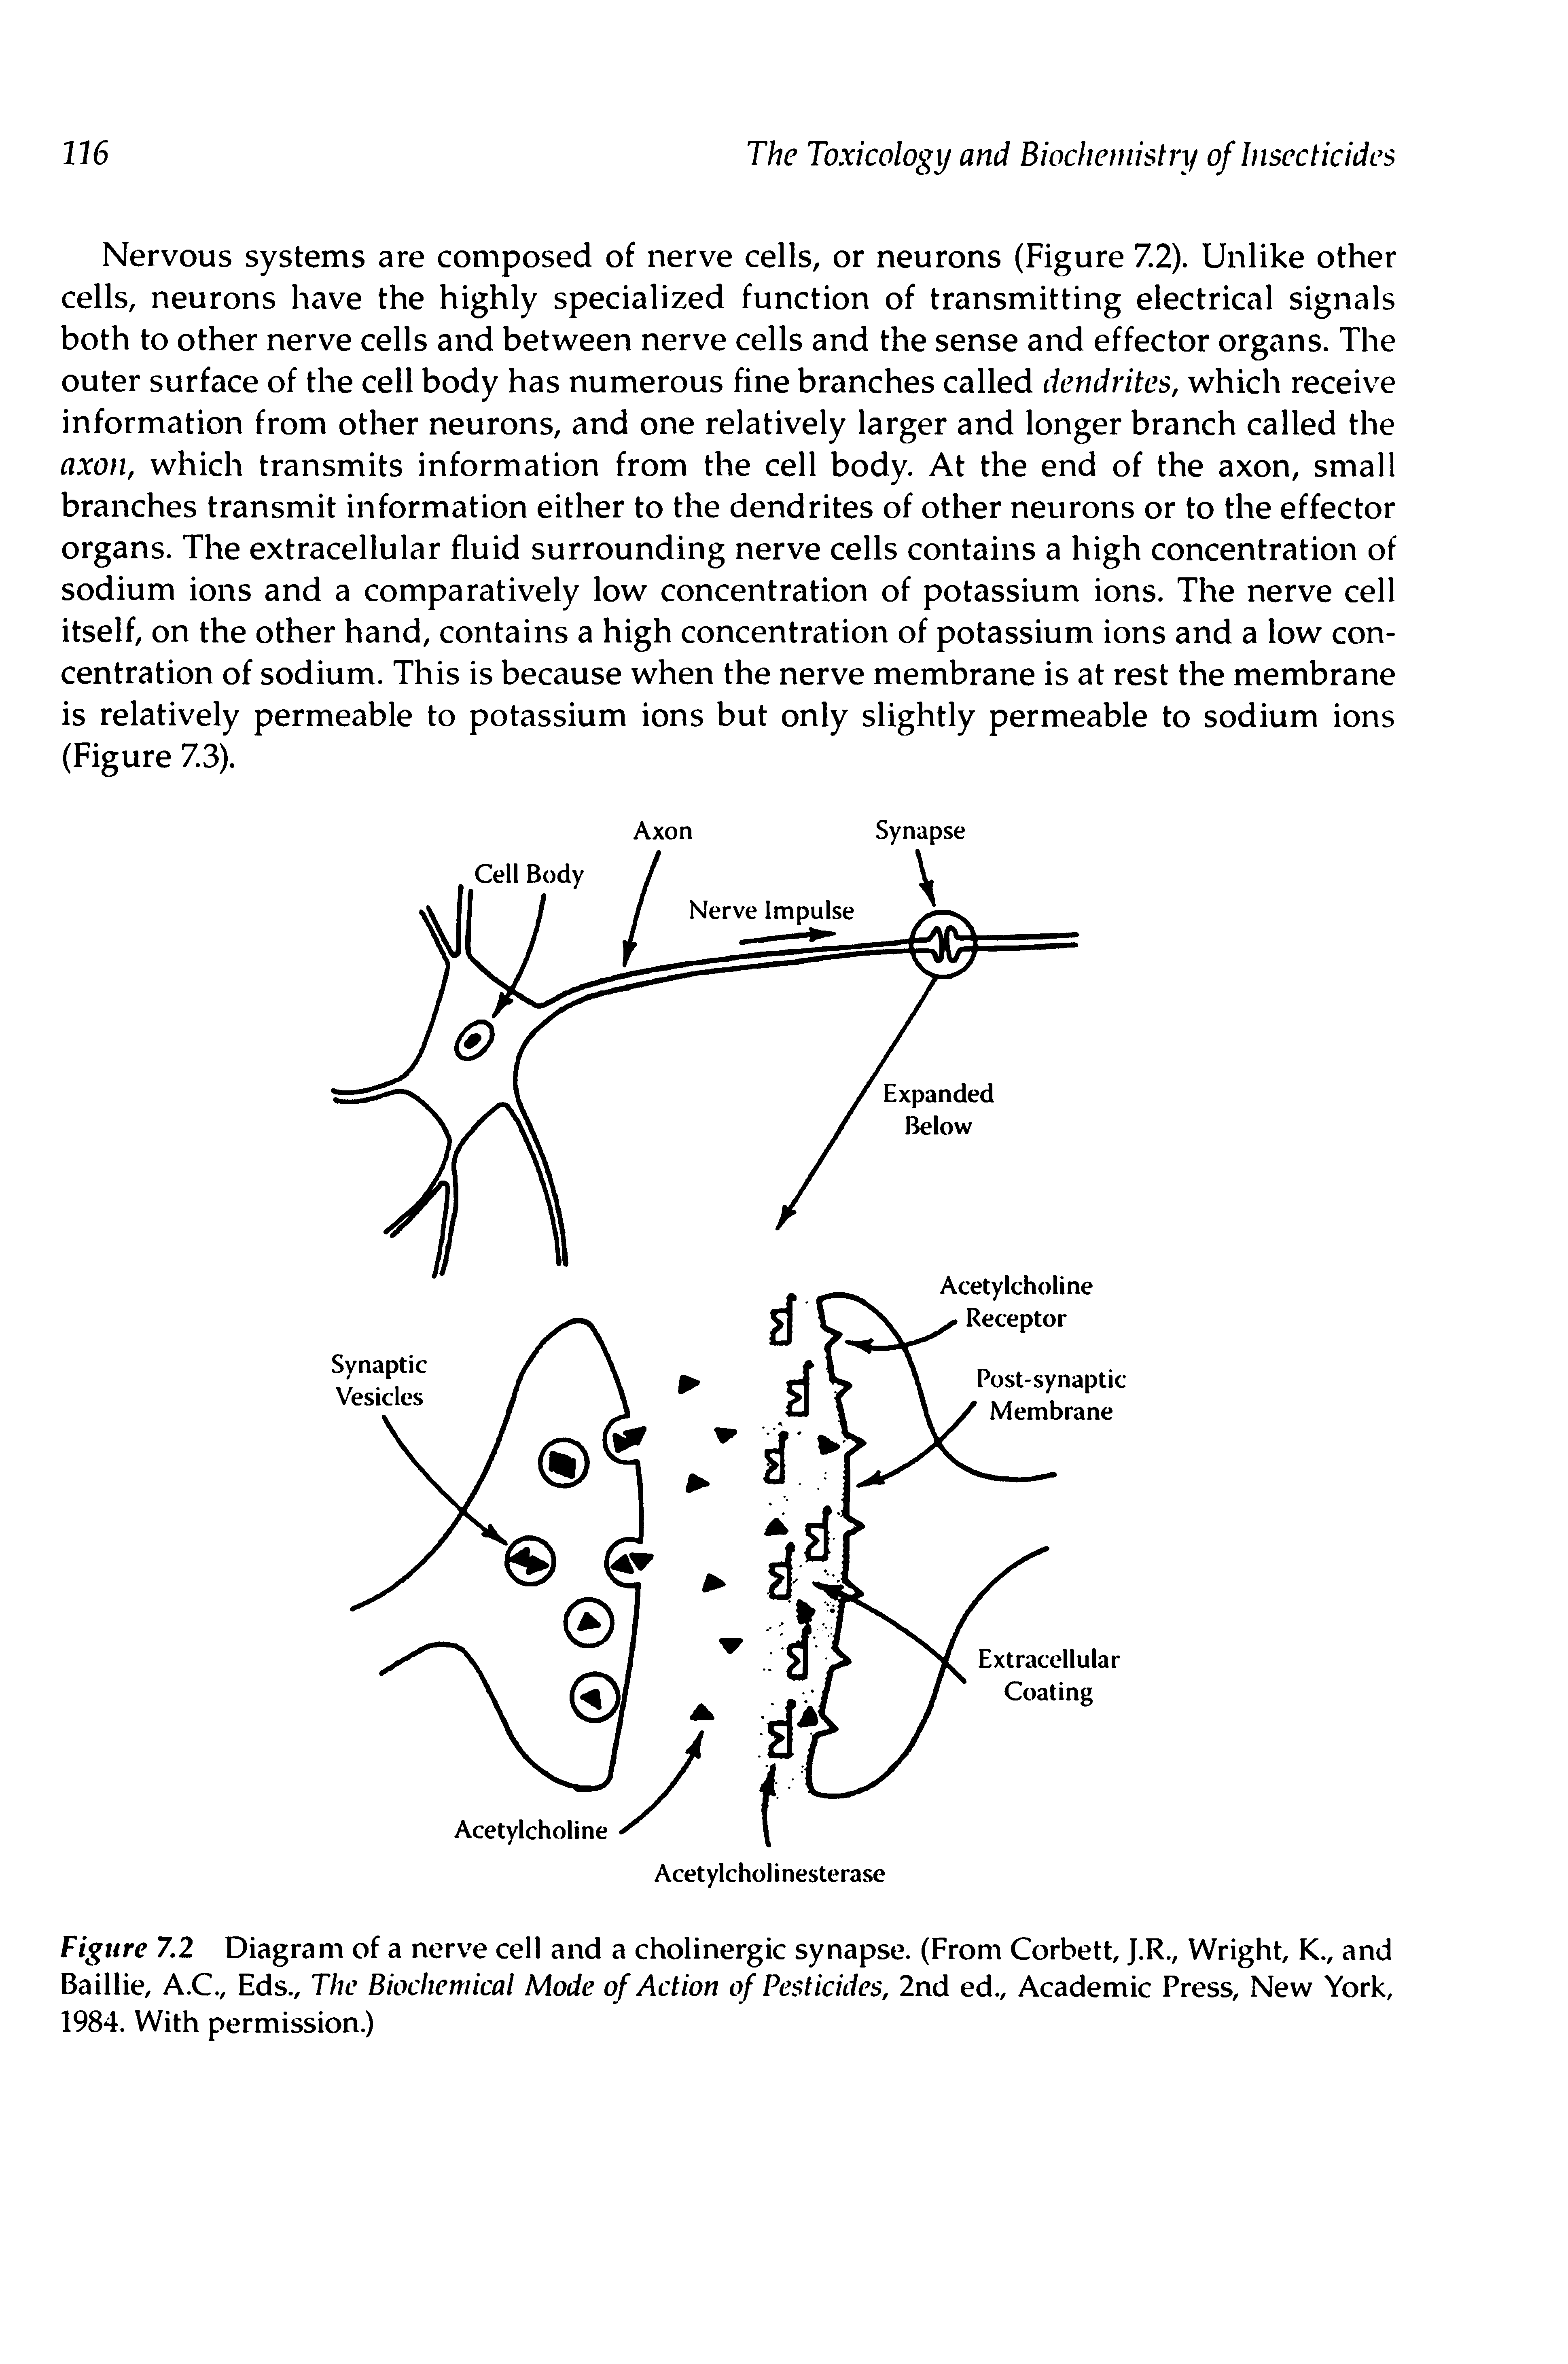 Figure 7.2 Diagram of a nerve cell and a cholinergic synapse. (From Corbett, J.R., Wright, K., and Baillie, A.C., Eds., The Biochemical Mode of Action of Pesticides, 2nd ed., Academic Press, New York, 1984. With permission.)...